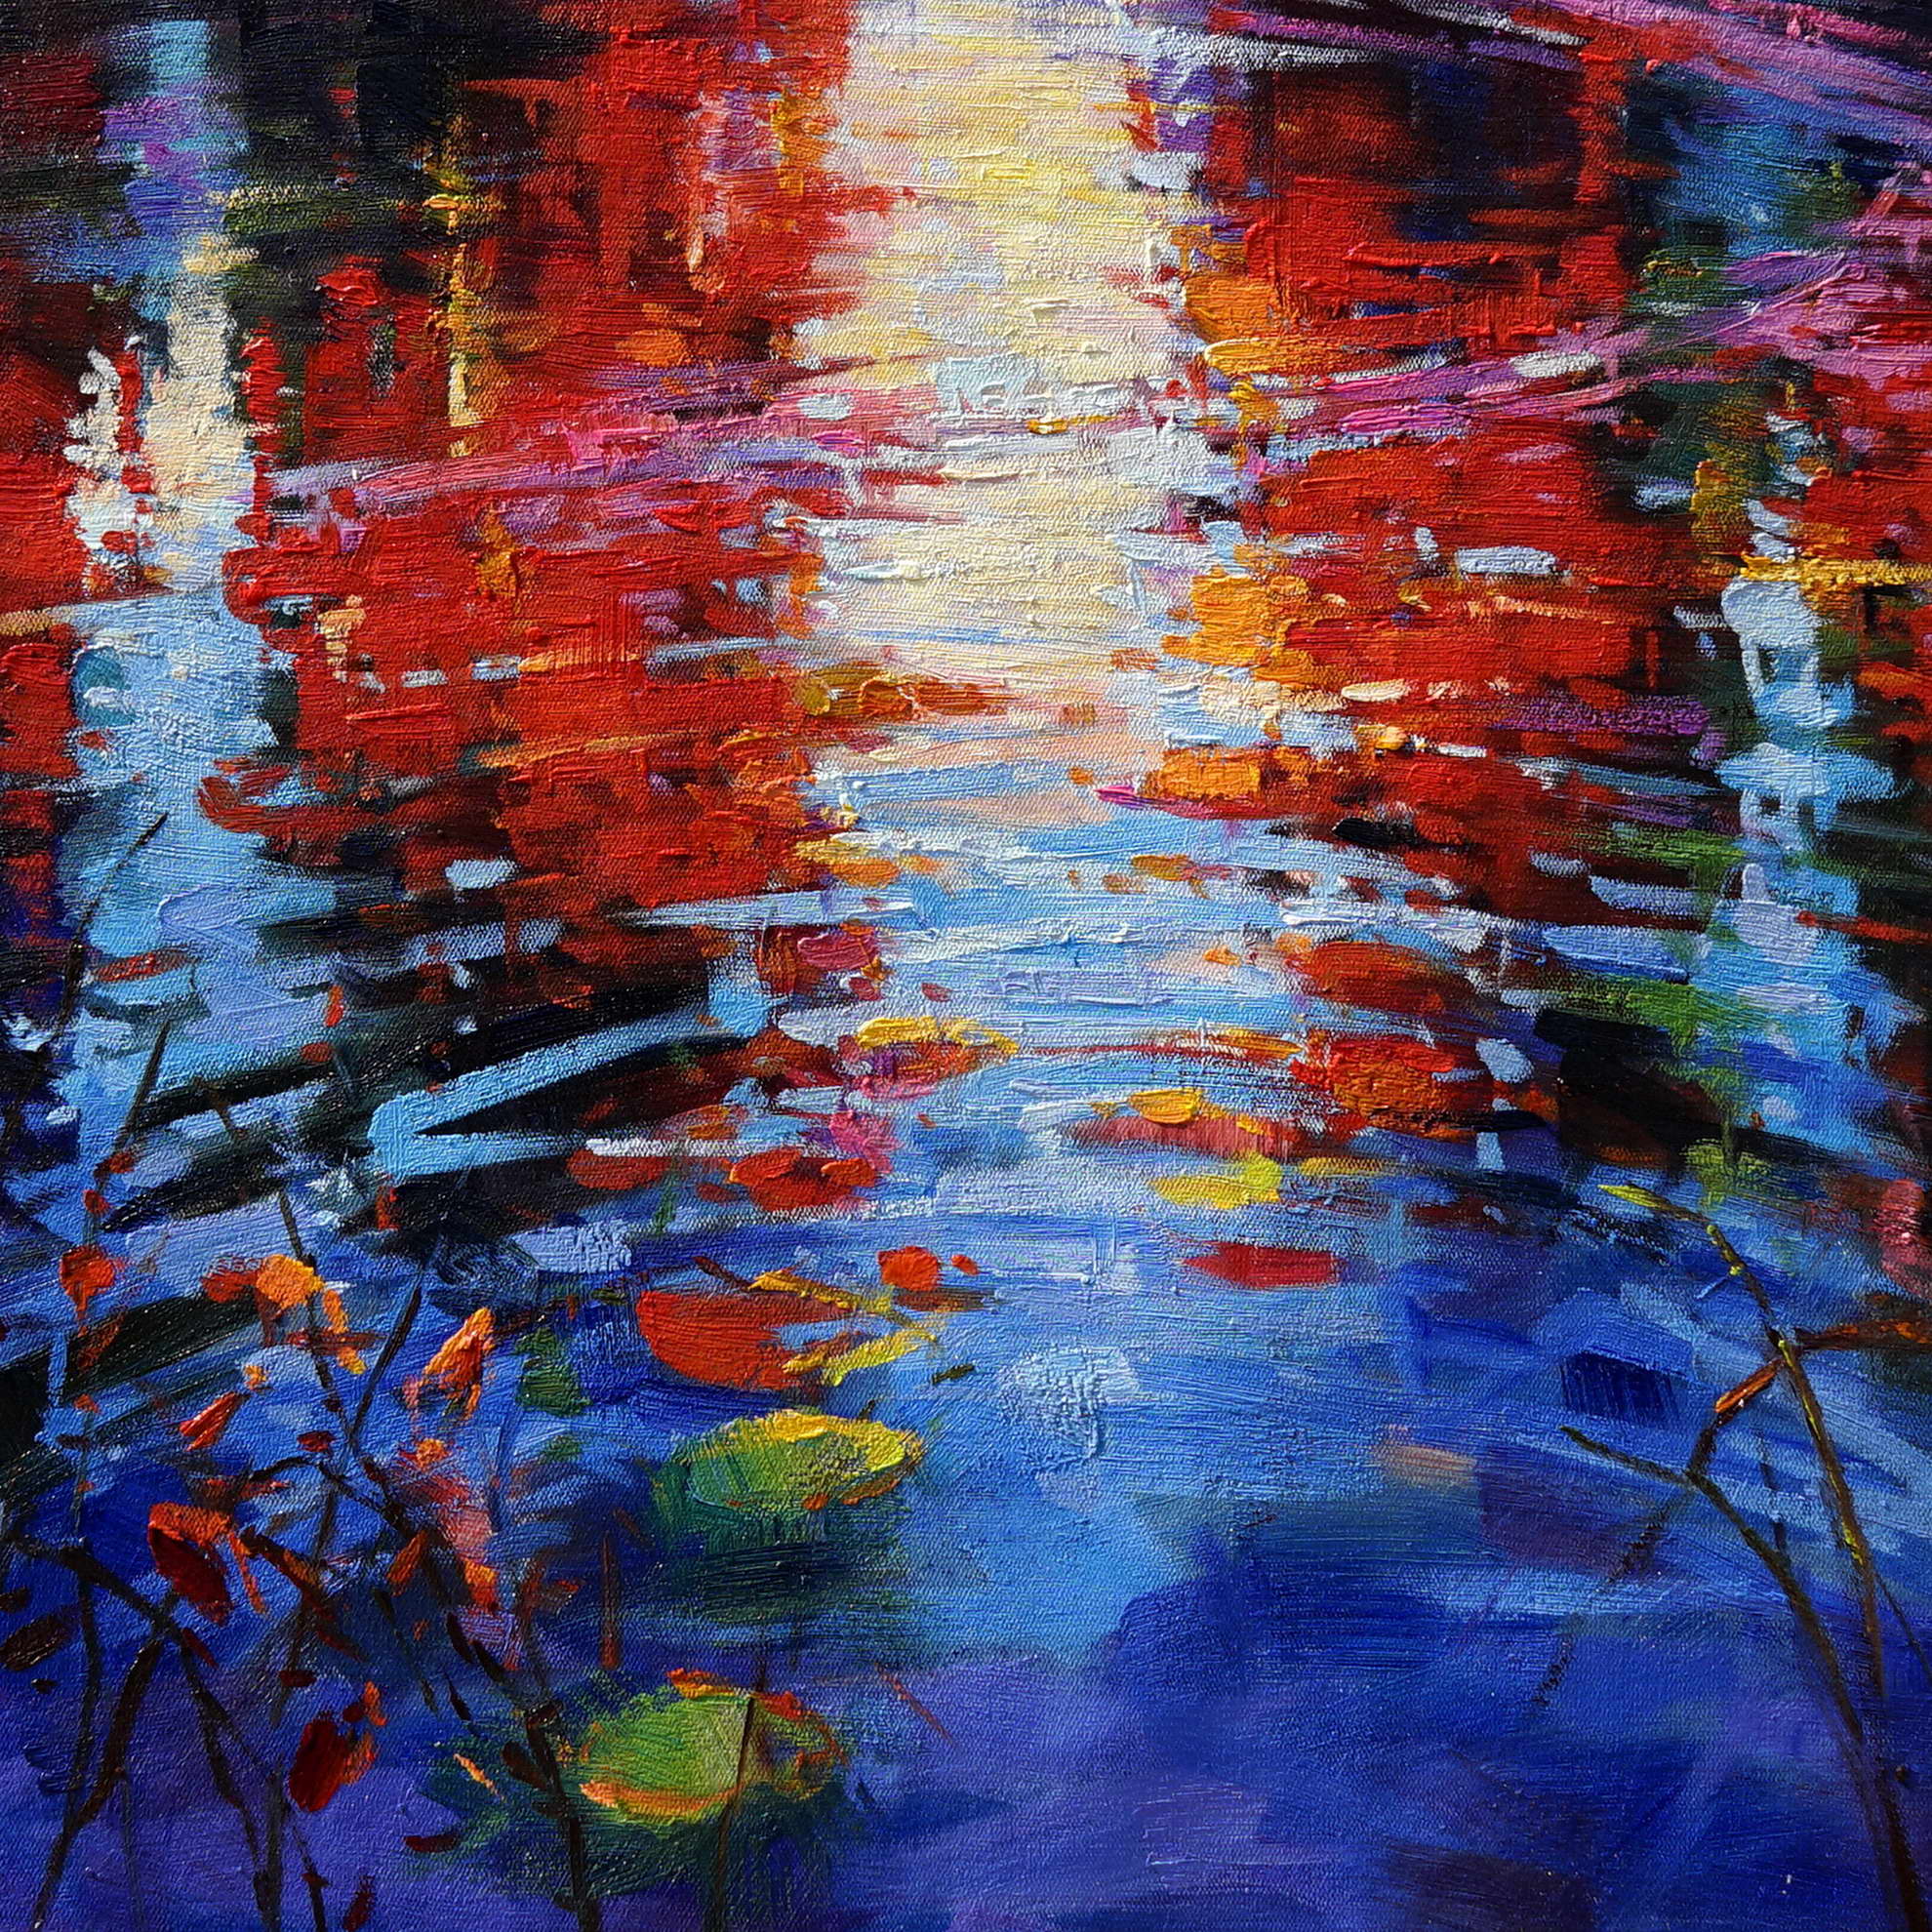 Hand painted Reflections at Sunset in the Swamp 60x80cm